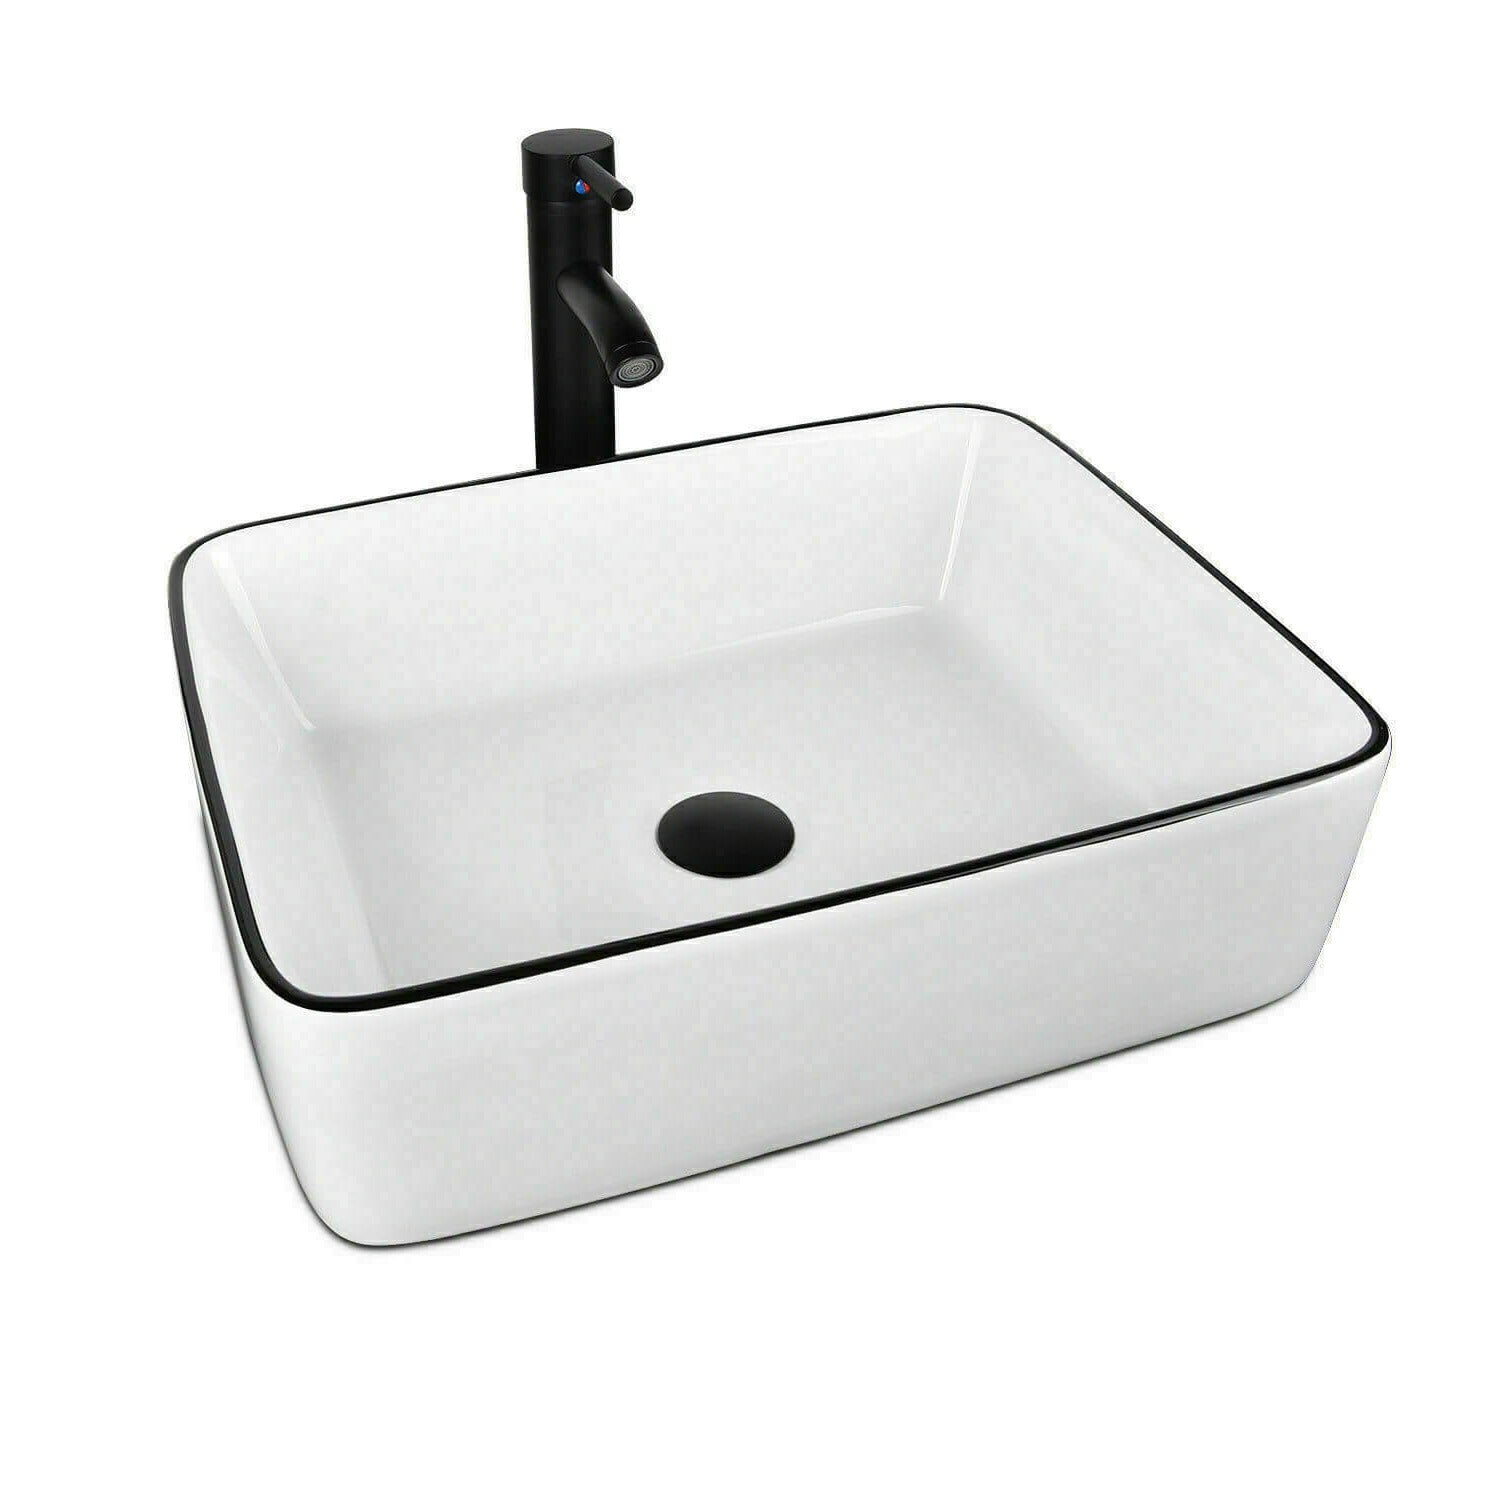 Elecwish white ceramic vessel sink with black edges with faucet & drainer set